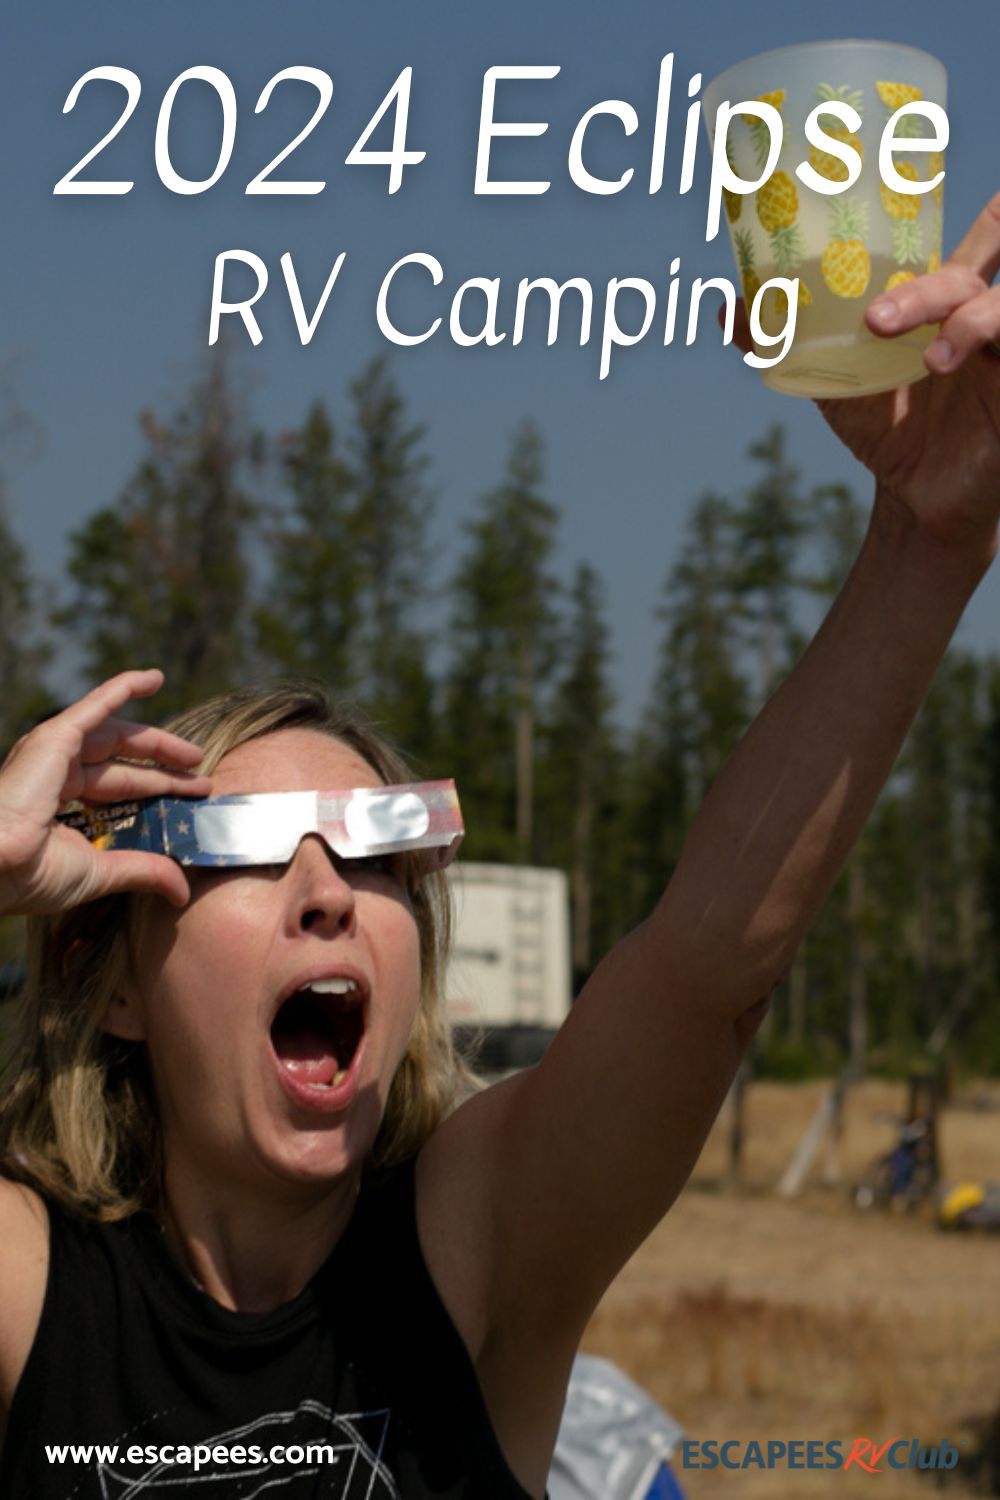 2024 Eclipse RV Camping Options 26